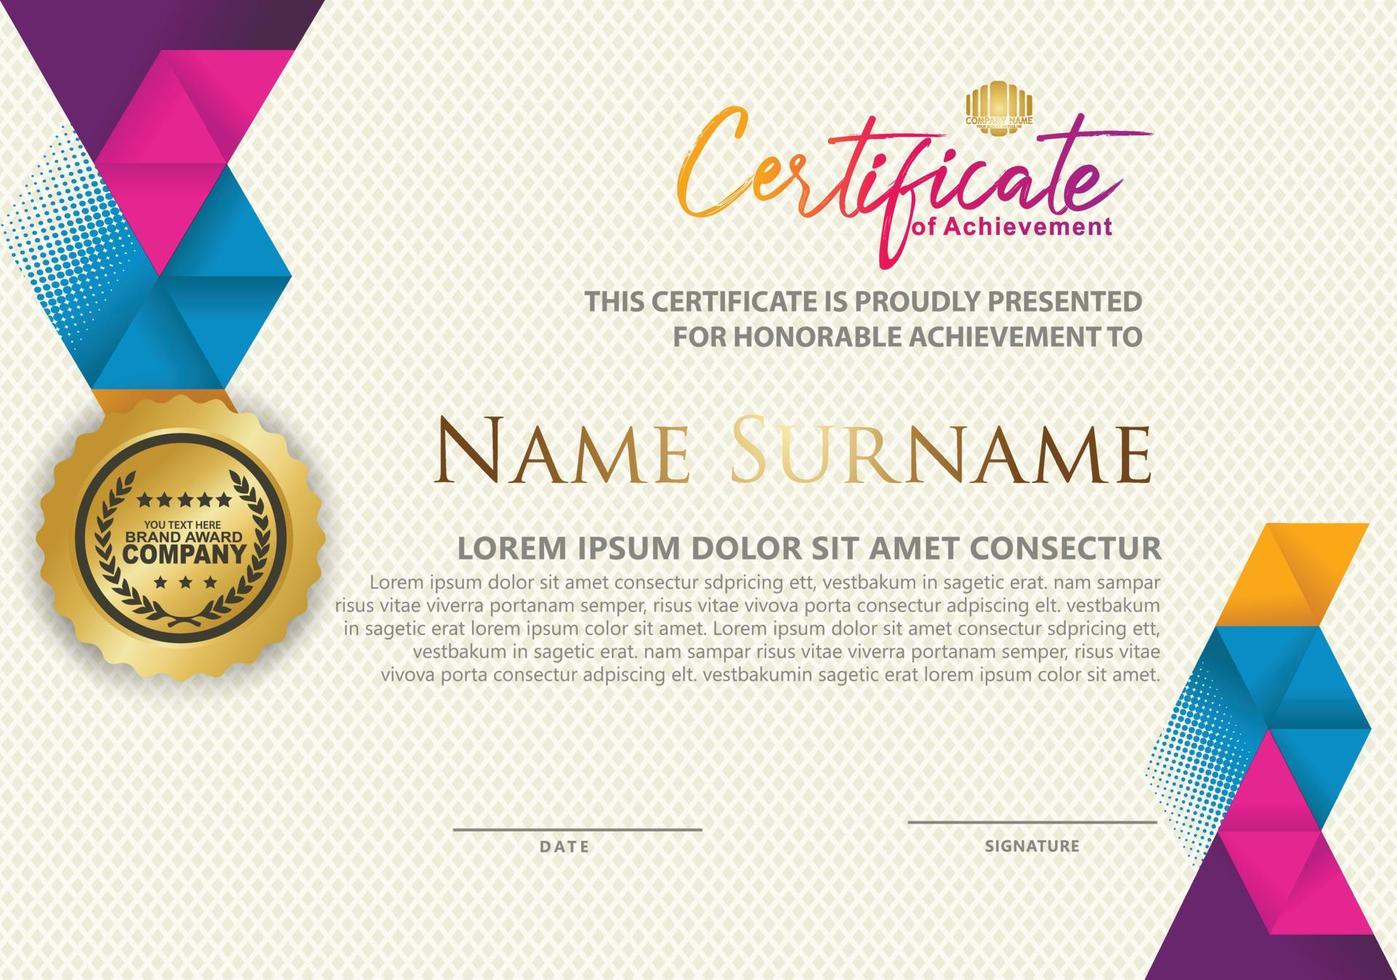 Certificate Template with Polygonal Geometric shape Pattern background. Vector illustration